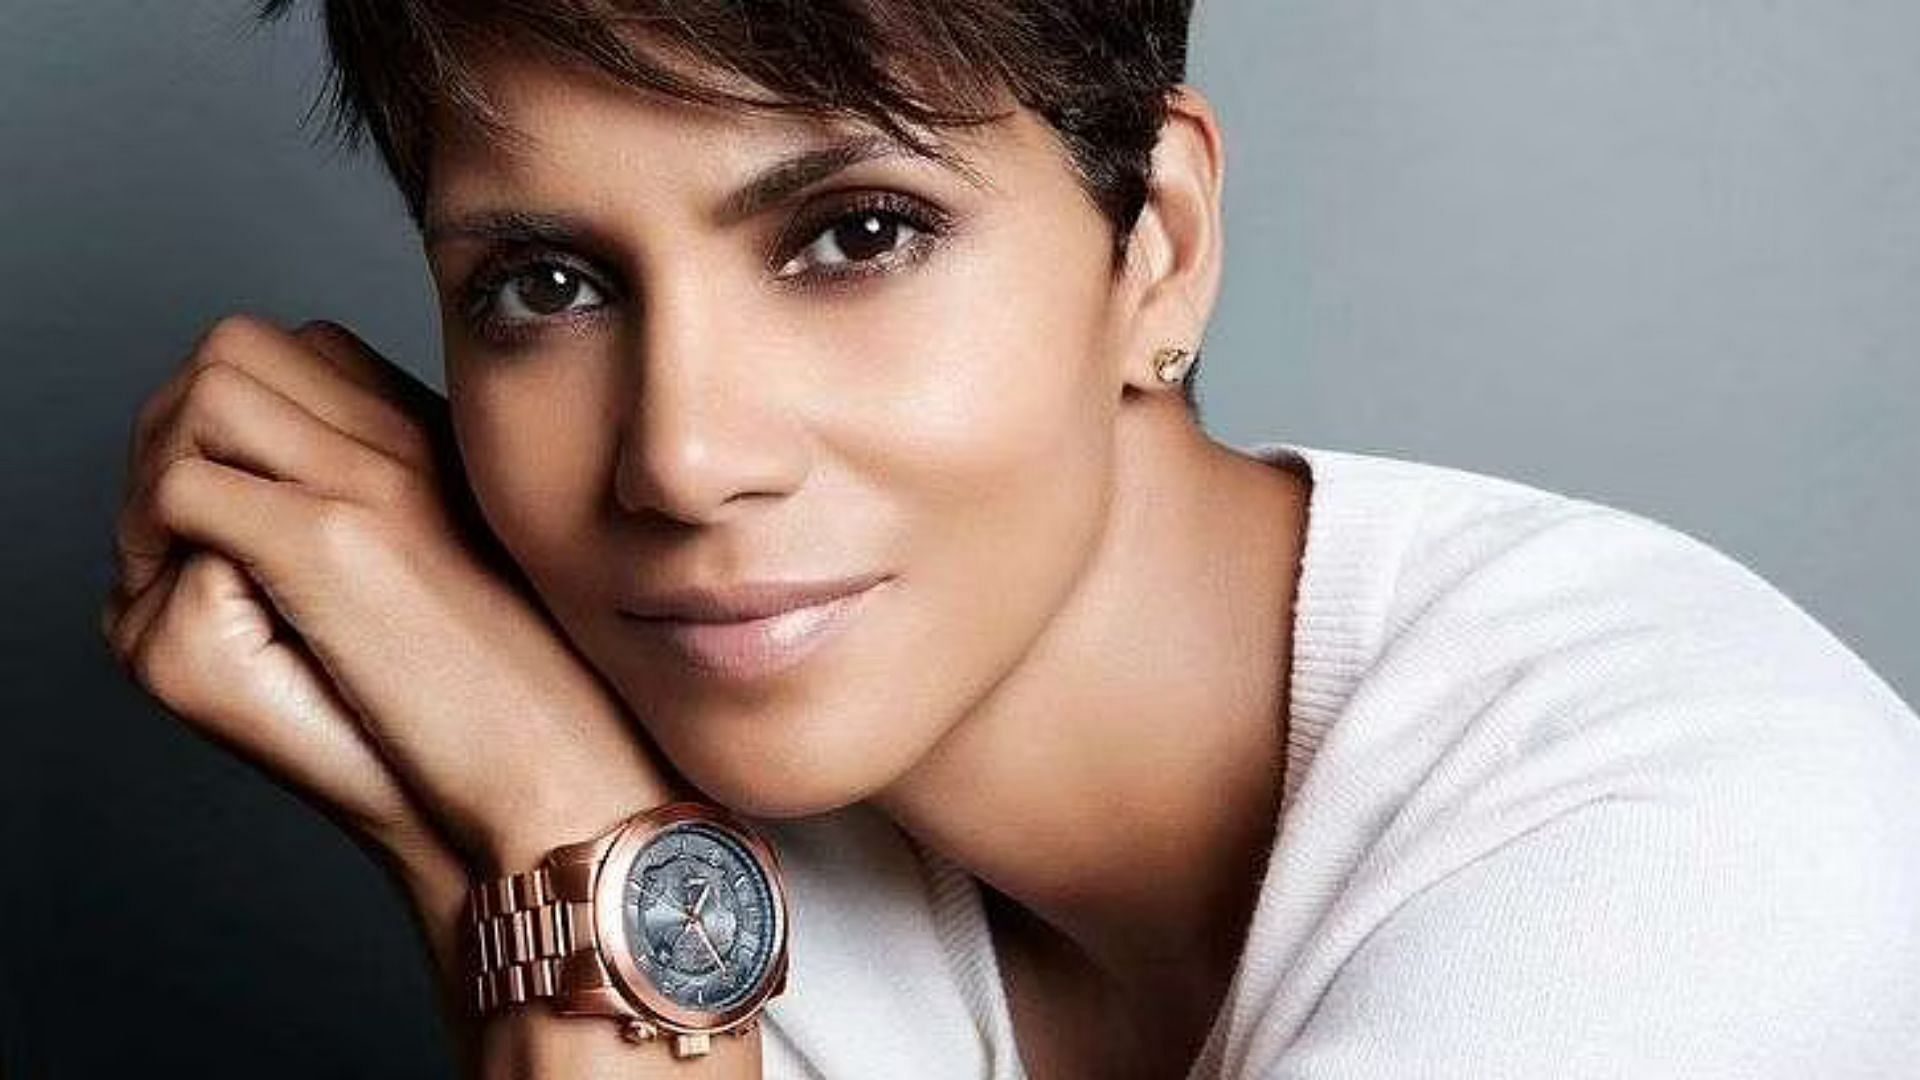 Halle Berry has strongly denied that she slept with WWE Hall of Famer Ric Flair